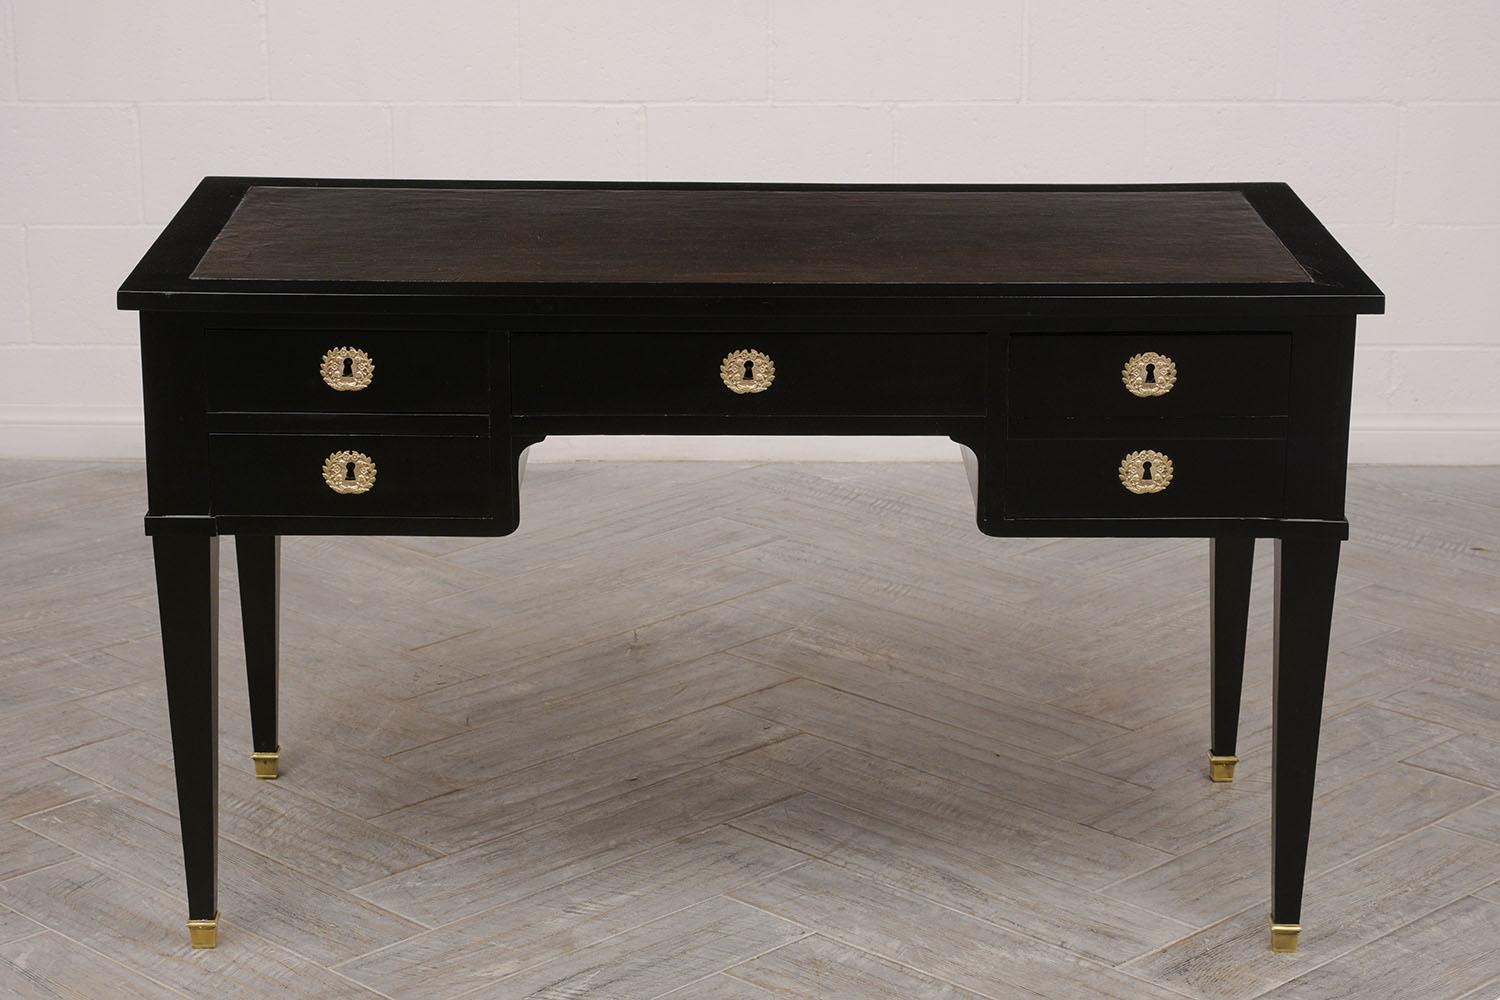 Elegant 1900s Louis XVI-style desk. Solid mahogany wood, newly refinished in a black lacquered color. Original dark brown leather top. Desk features two leaves with leather tops, one on each side. One large center drawer with bronze design key